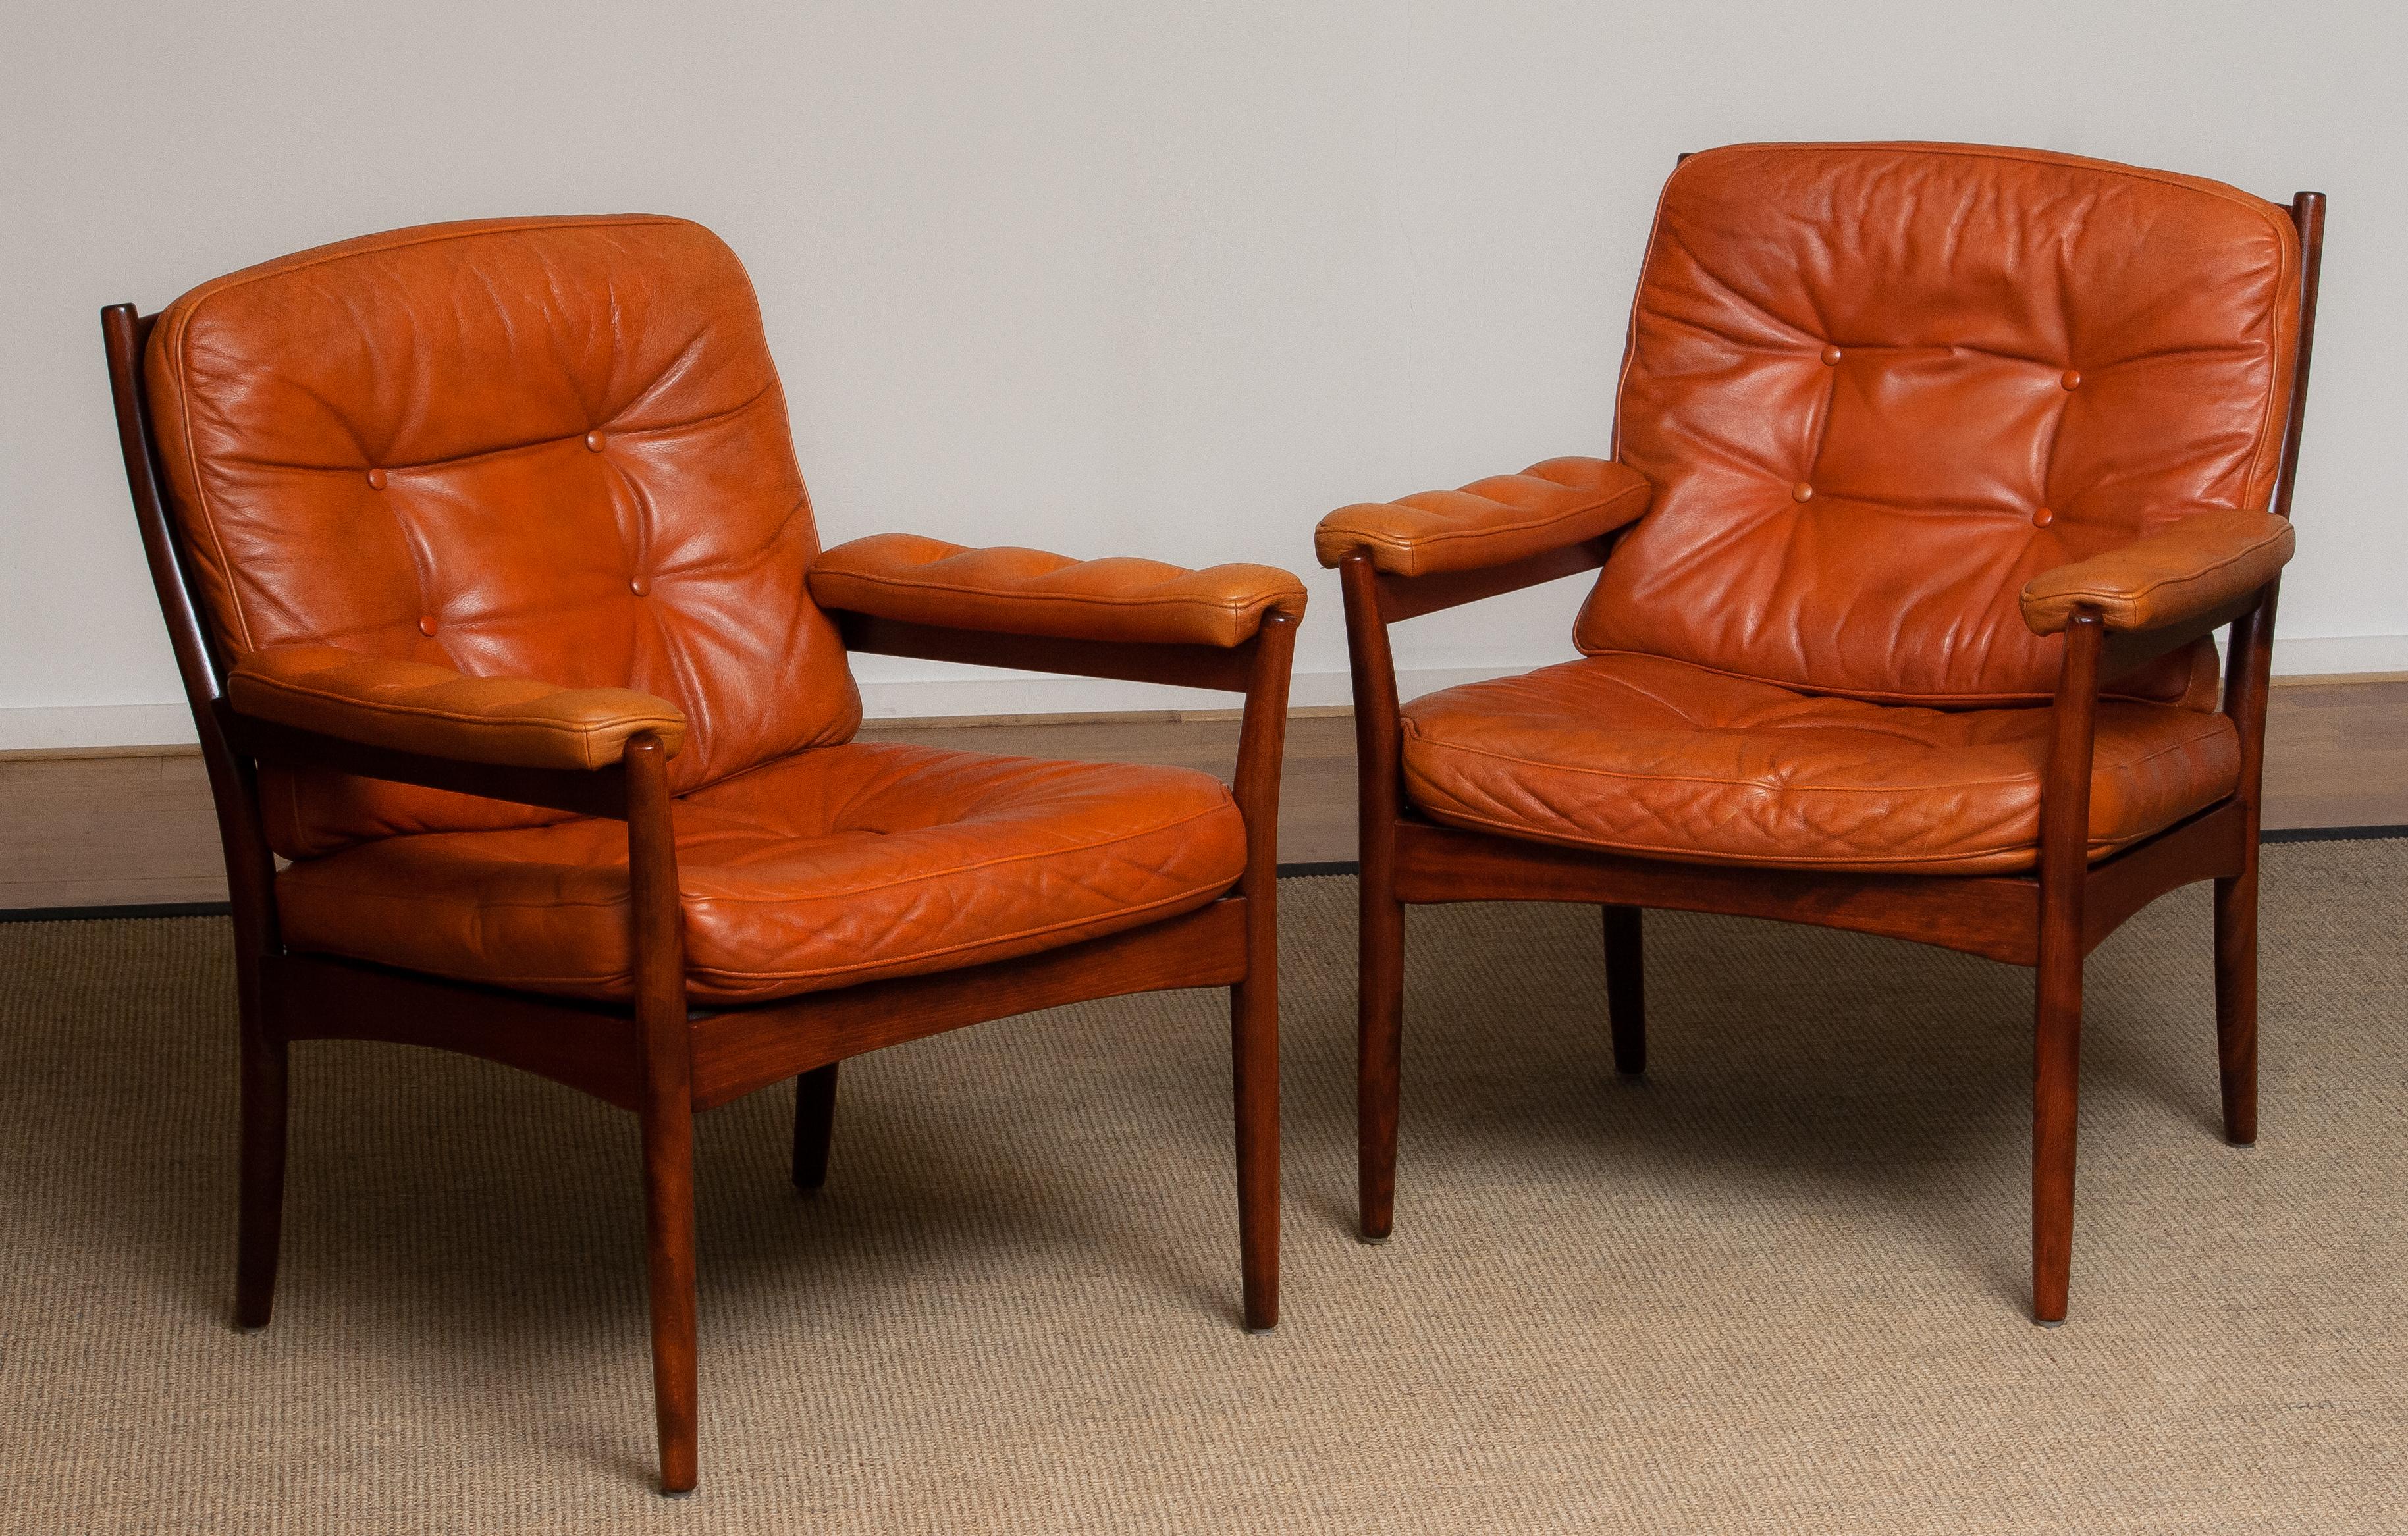 This set of two armchairs are made in the 1970s by Göte Möbels Nässjö in Sweden. The frames are made of beech in mahogany color and they are upholstered with sturdy cognac leather.
These are chairs are very comfortable and their overall condition